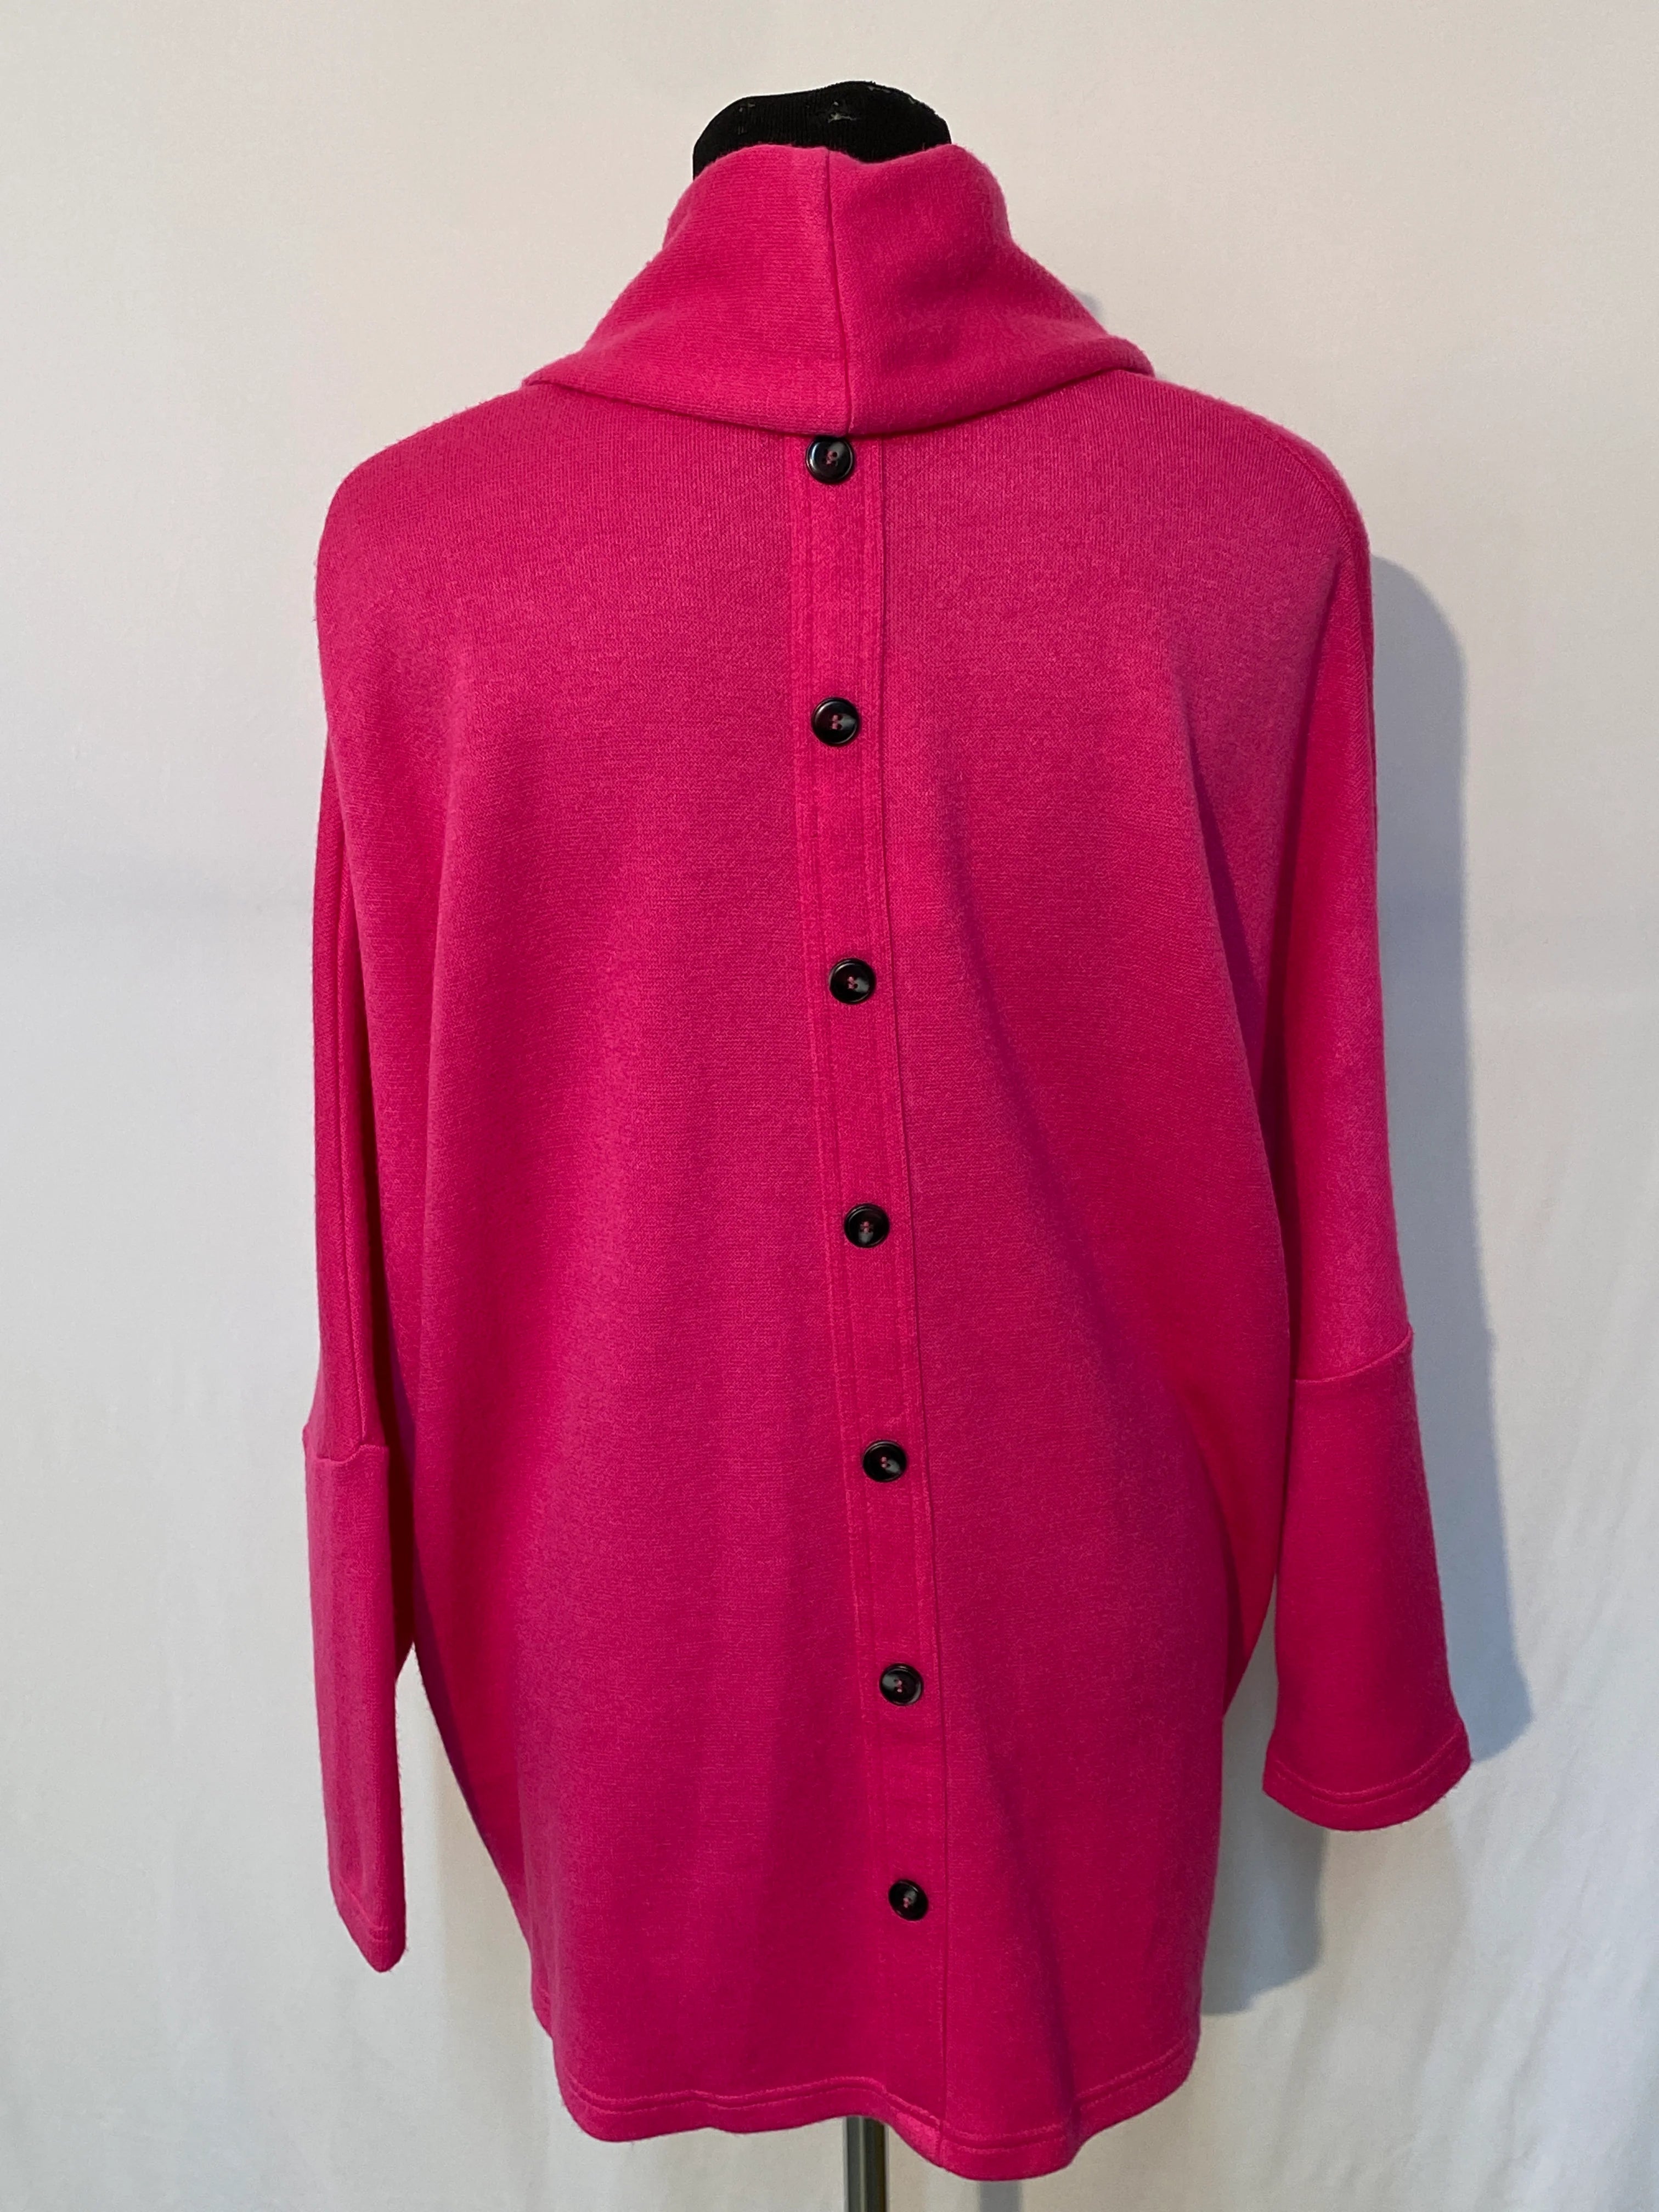 Cowl Neck Sweater - Hot Pink